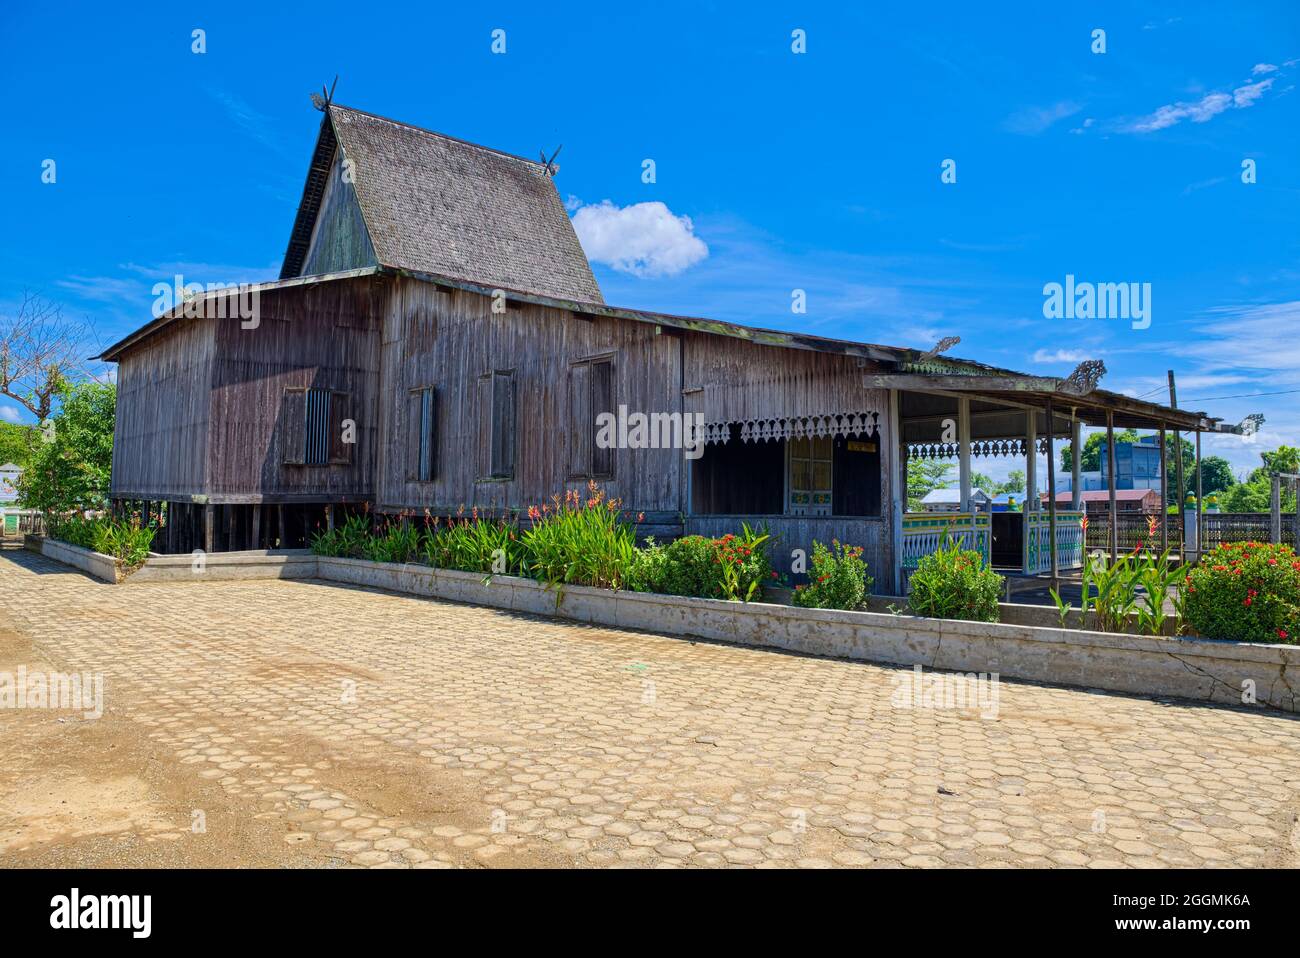 The Banjar house that uses Height Bubungan (Bubungan Tinggi) roof is called the Bubungan Tinggi House. This type of house is the highest value among o Stock Photo